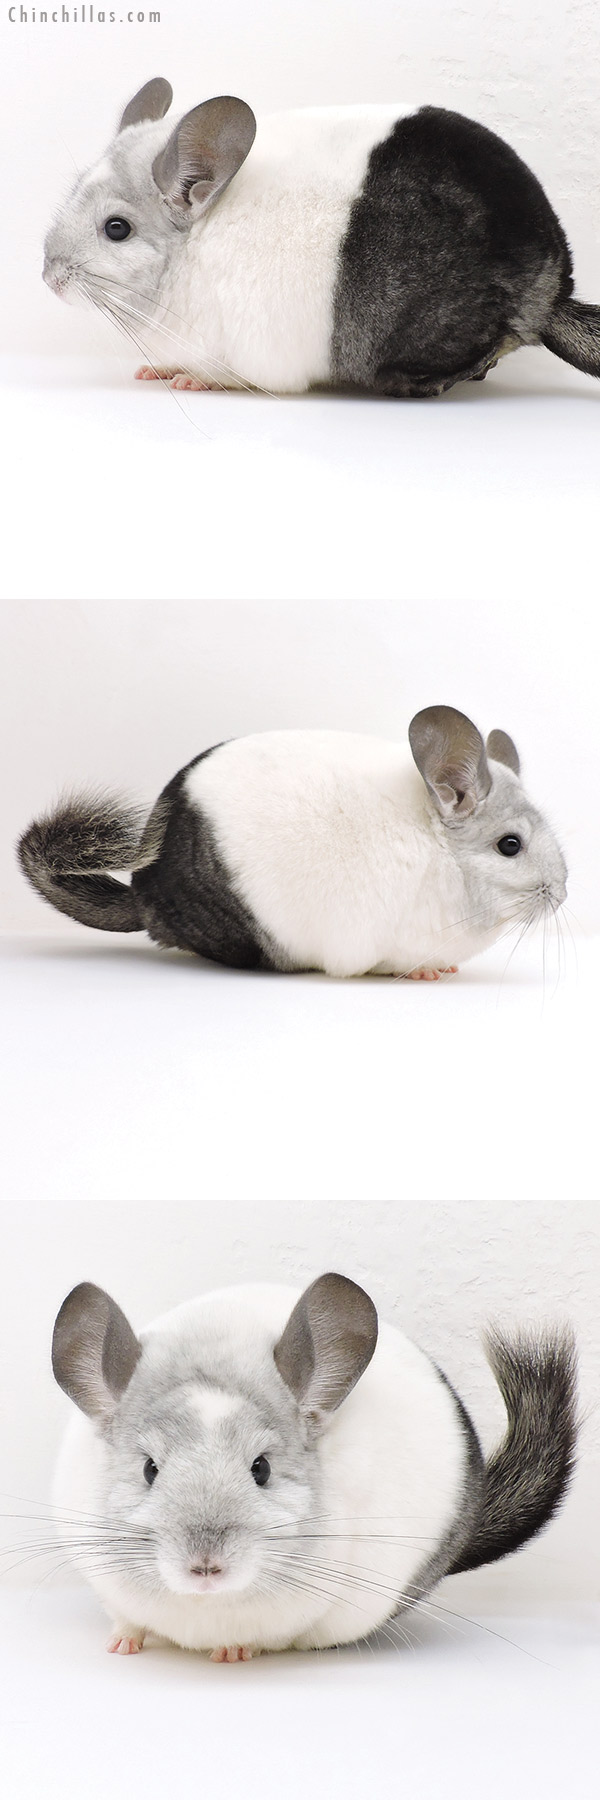 Chinchilla or related item offered for sale or export on Chinchillas.com - 18231 Large Premium Production Quality Extreme Ebony and White Mosaic Female Chinchilla